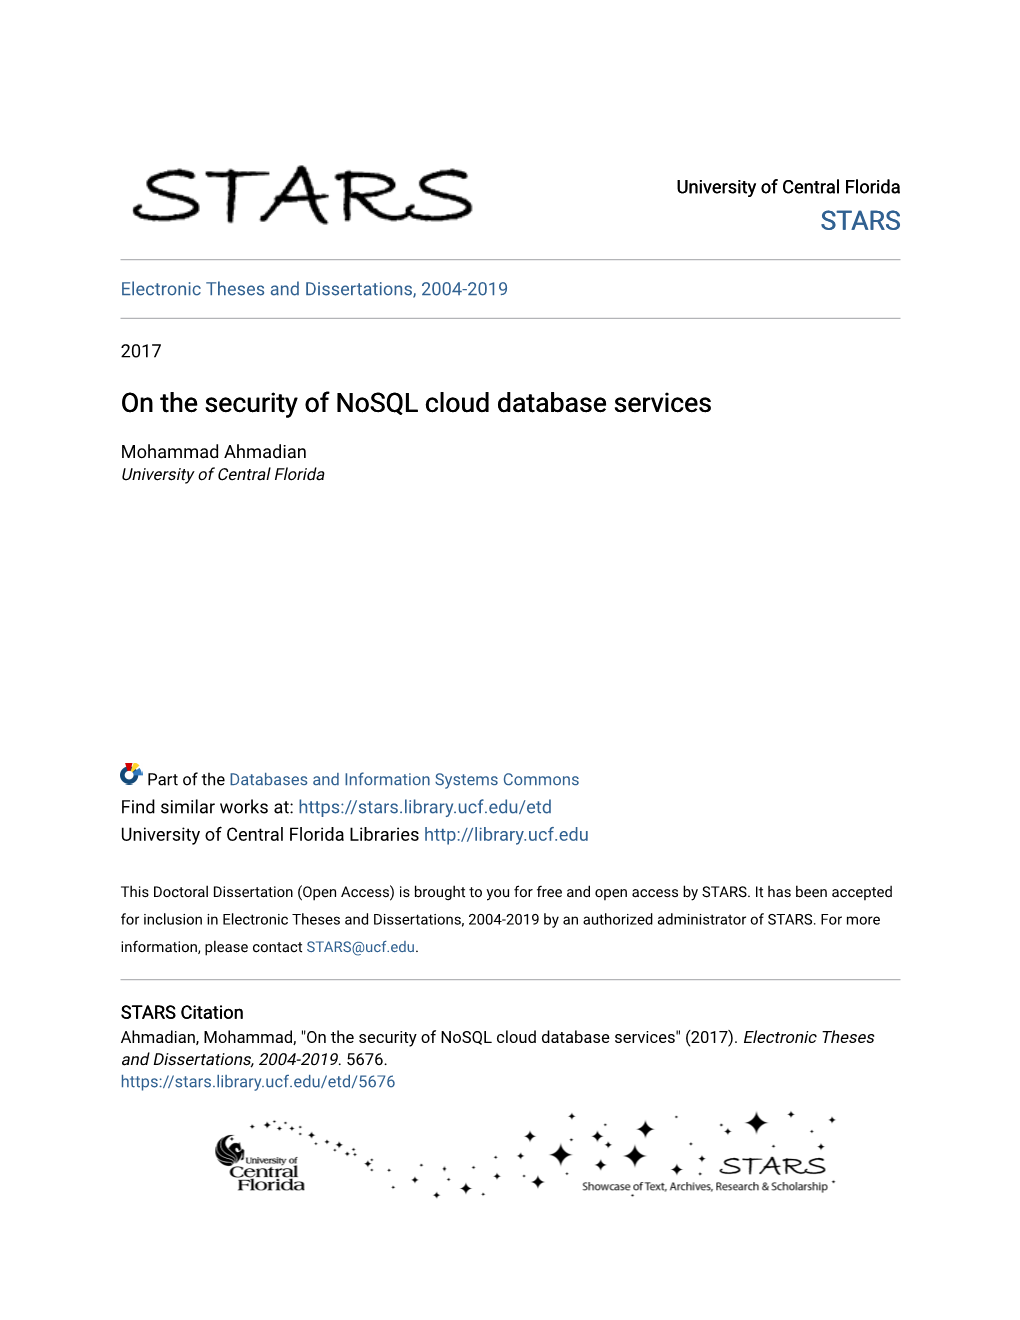 On the Security of Nosql Cloud Database Services